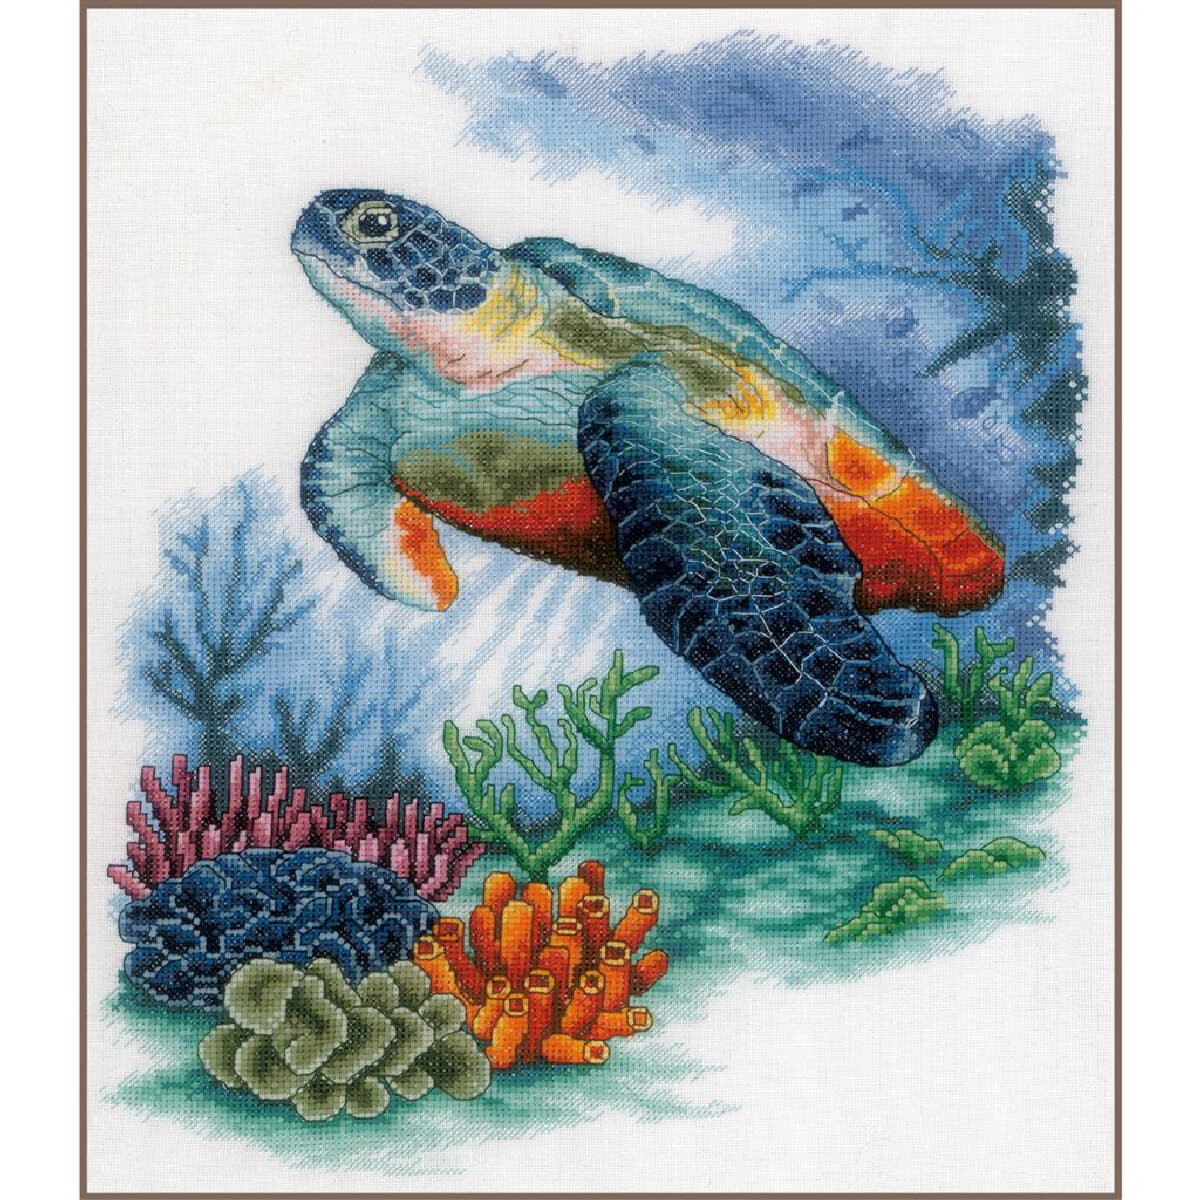 A detailed Lanarte embroidery pack of a sea turtle...